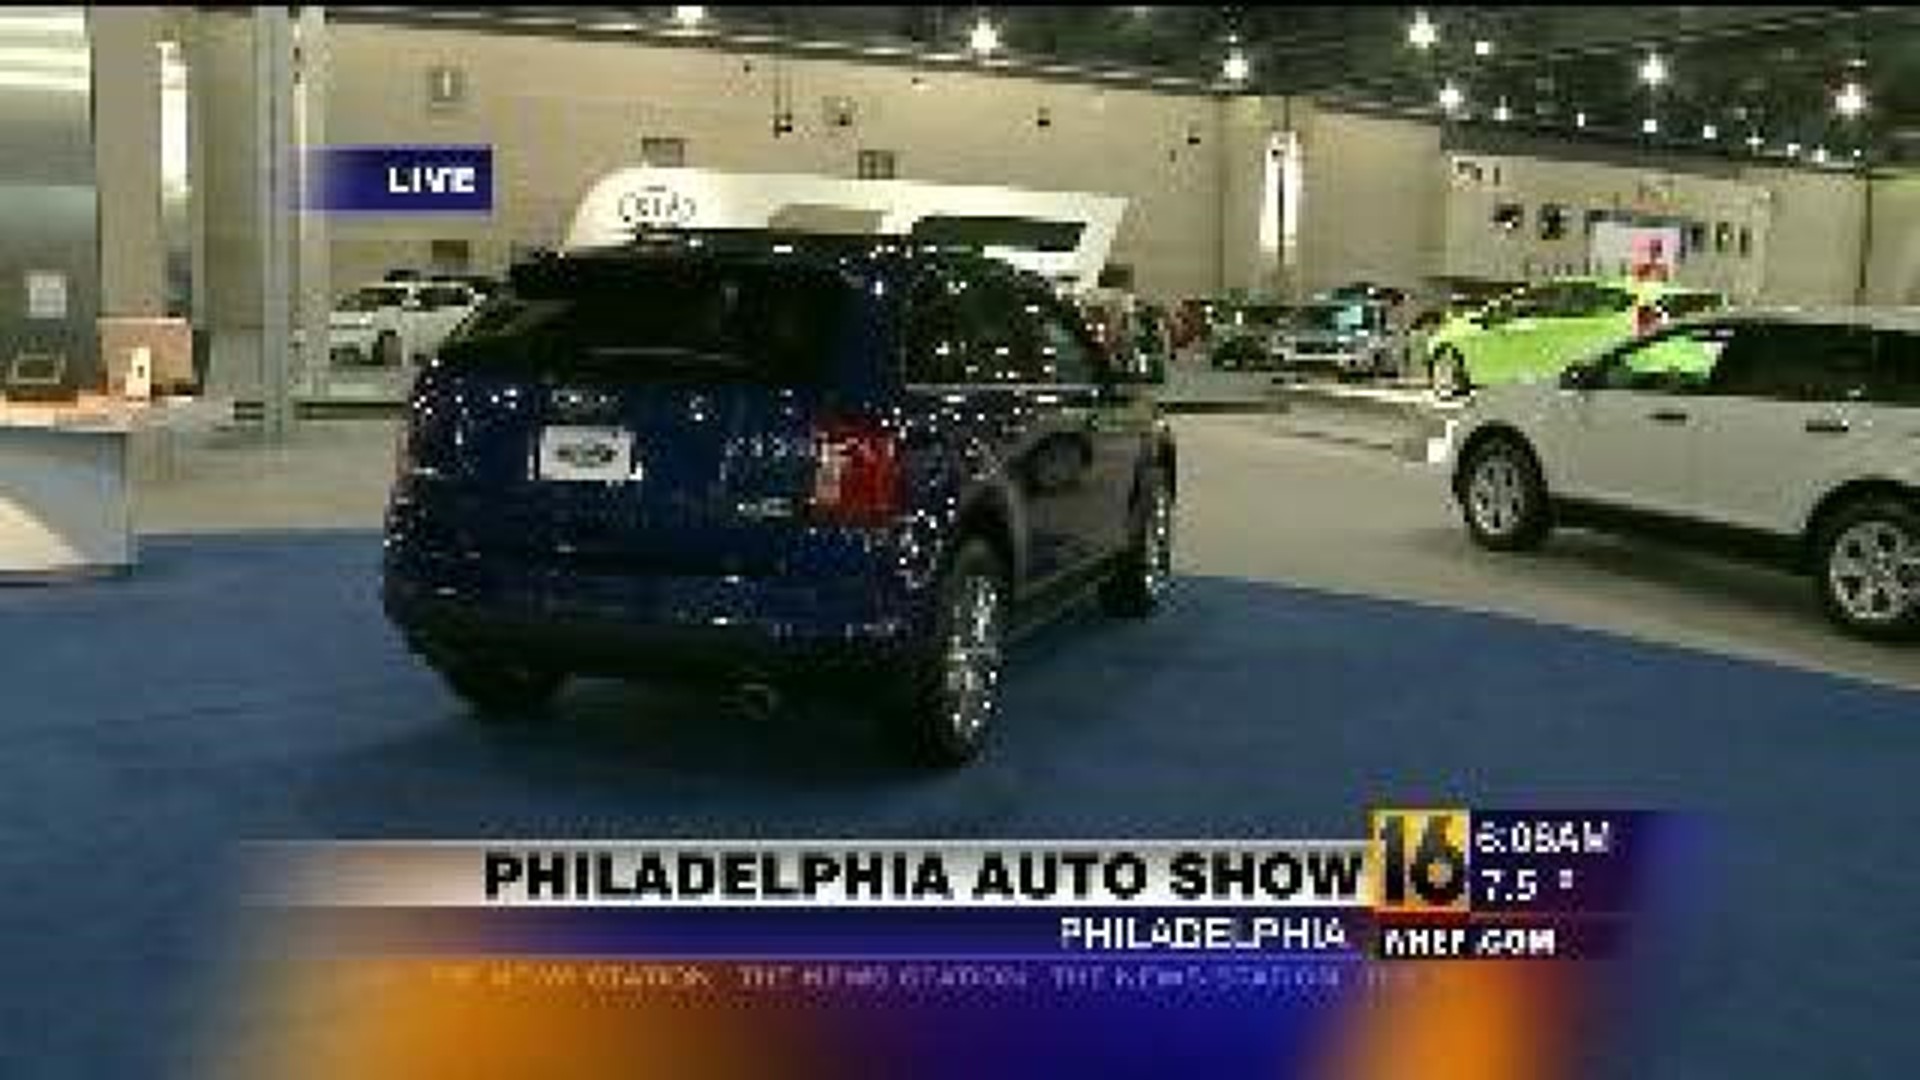 Philly Auto Show: New Technology